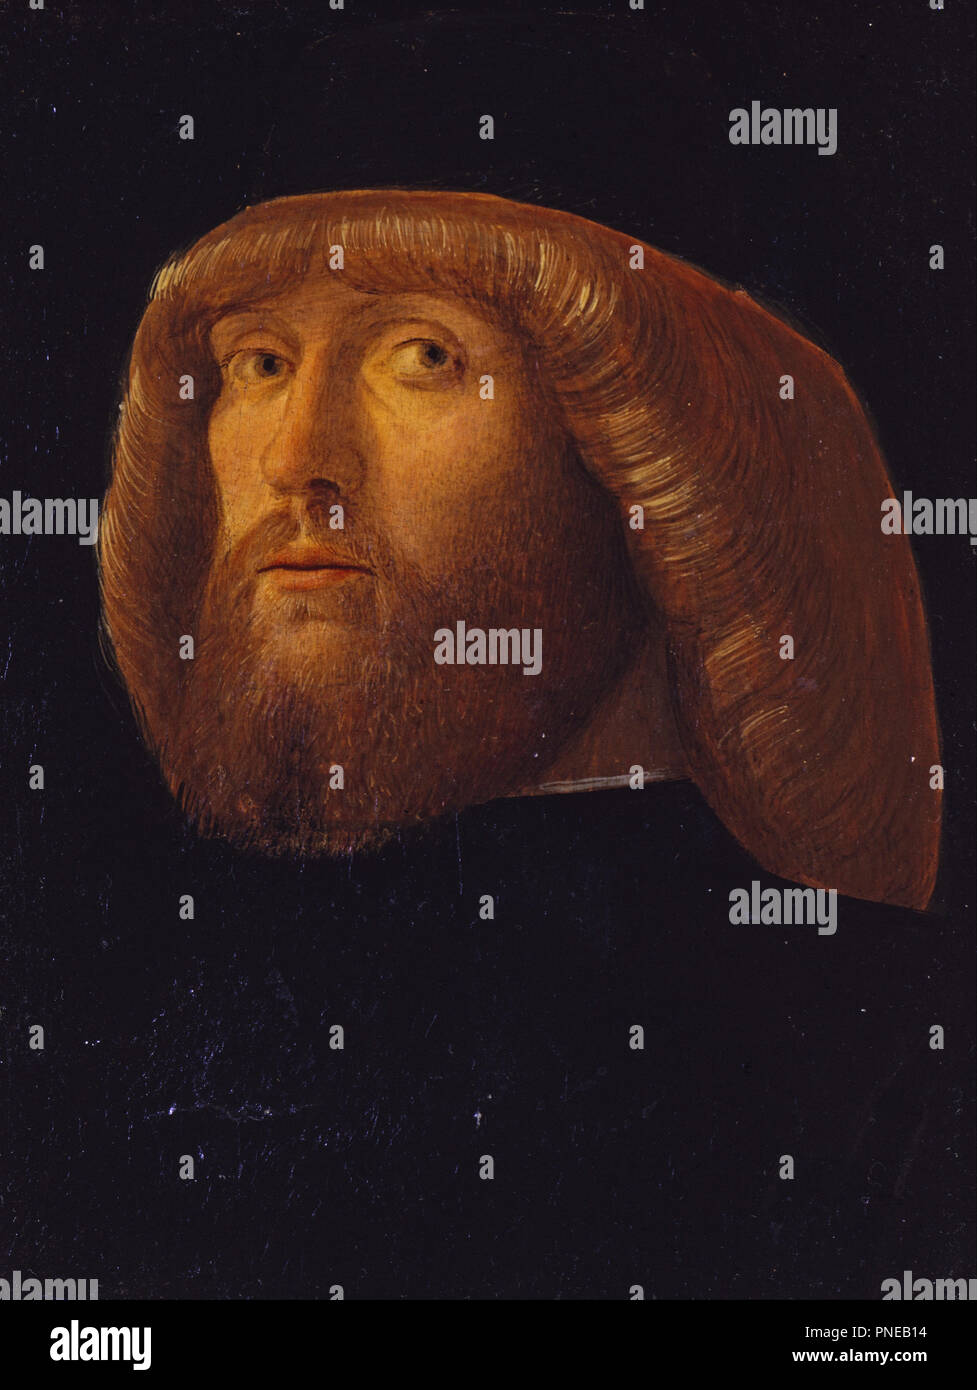 A Bearded Man. Date/Period: 1485. Tempera on Panel. Author: GIOVANNI BELLINI. Stock Photo